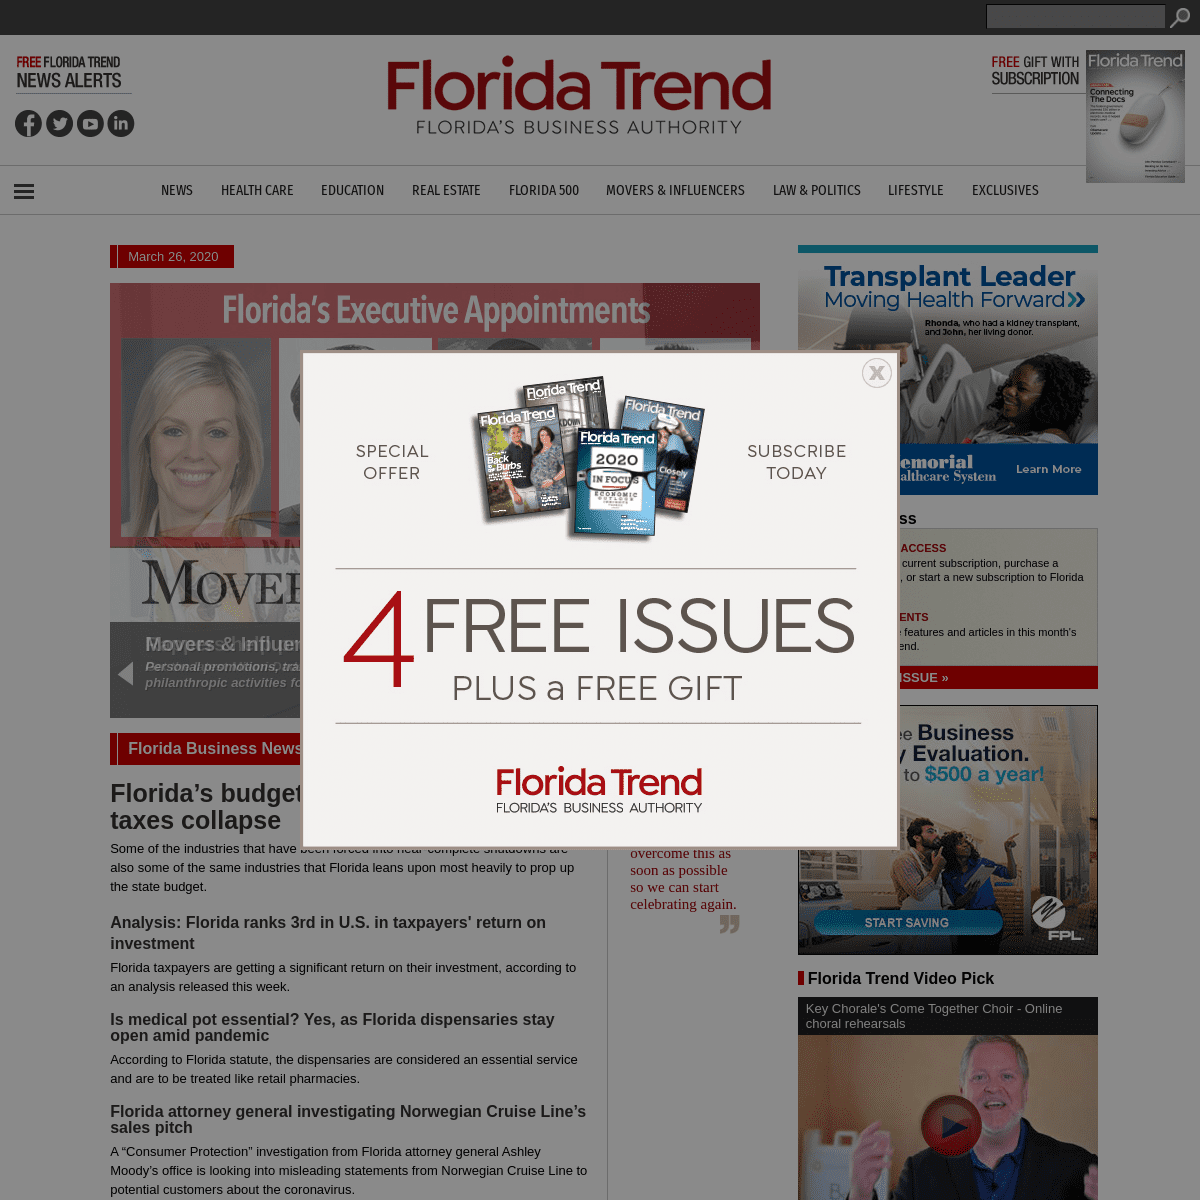 A complete backup of floridatrend.com